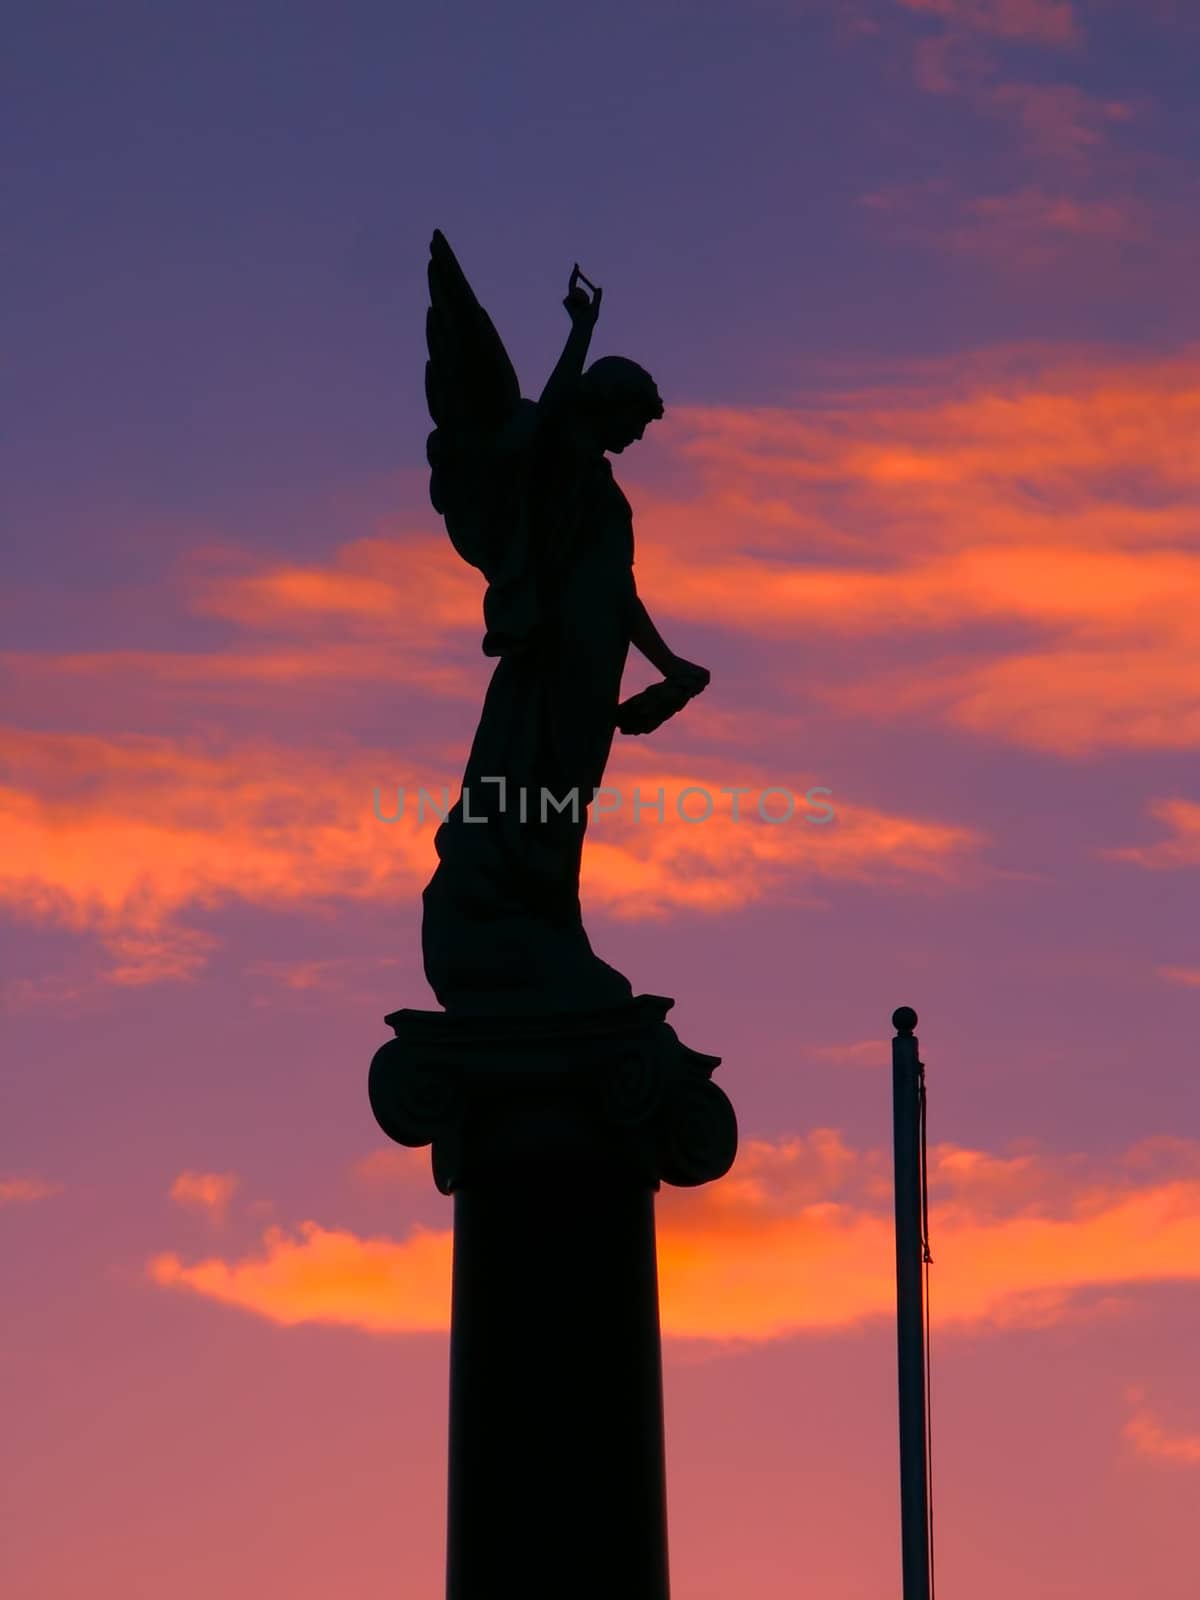 Warrnambool, Australia - August 16, 2005: The Warrnambool War Memorial commemorates Australian veterans who served their country.  Seen here is the angel on the top part of the monument silhouetted against the sunset.